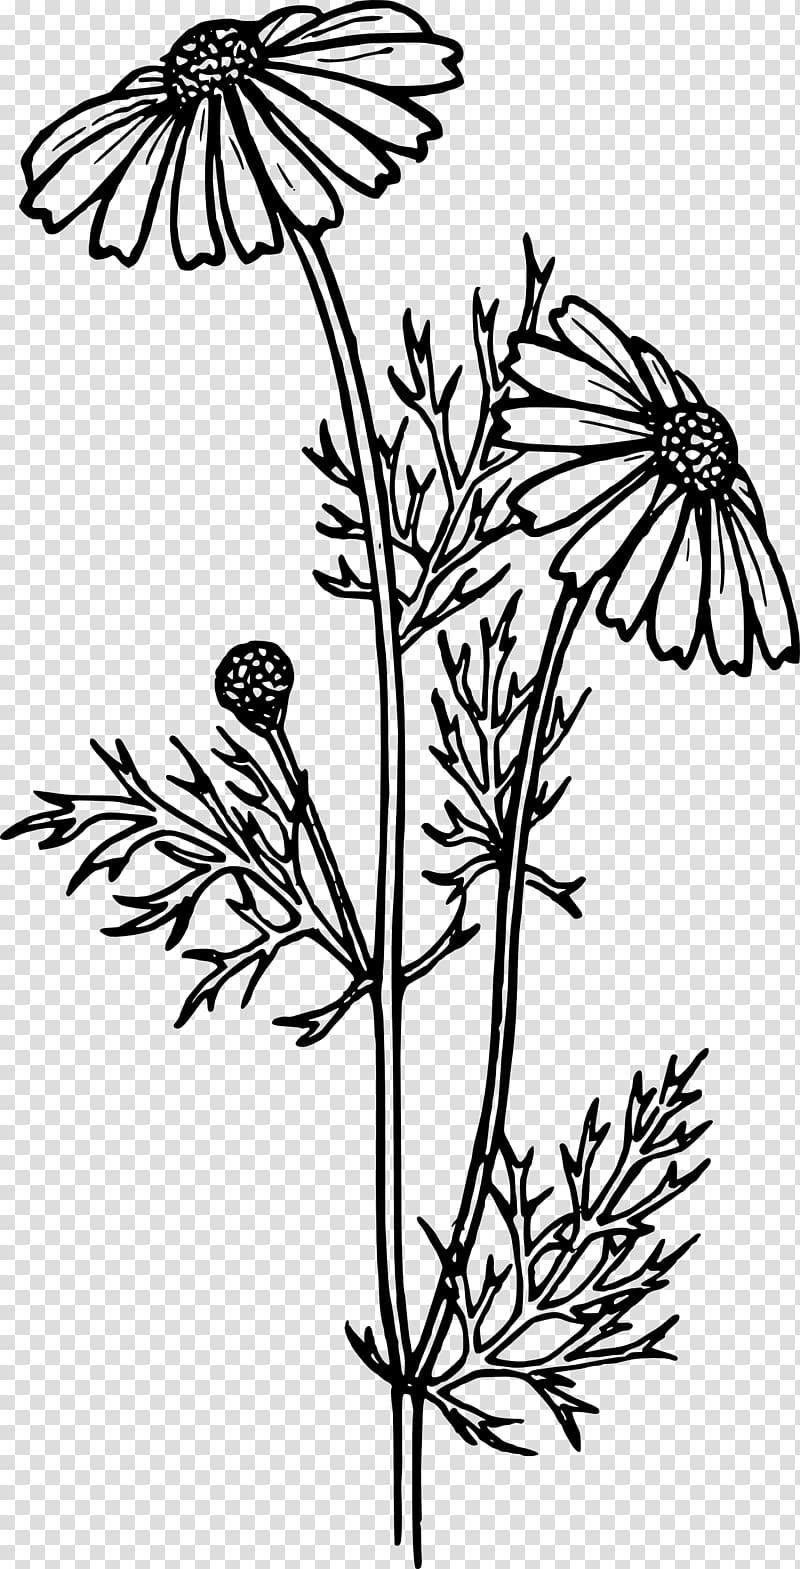 Coloring book Common daisy Flower Daisy family Gerbera jamesonii, flower transparent background PNG clipart